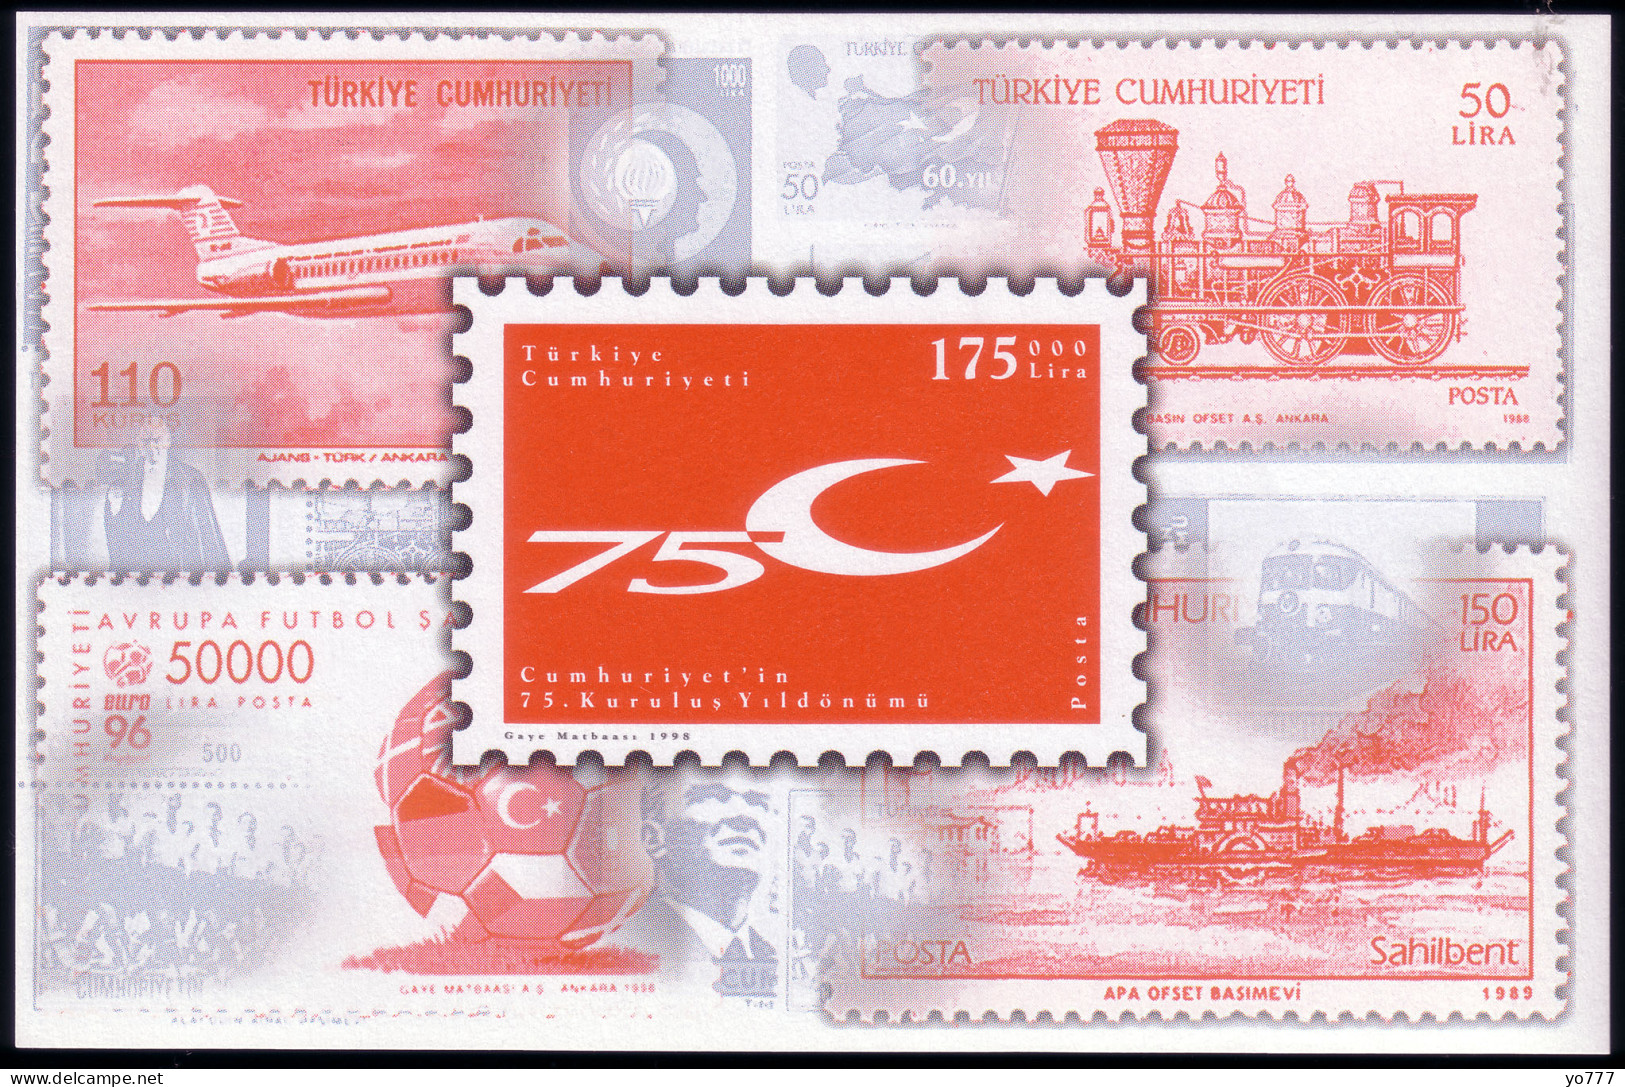 (3159-60 BL) TURKEY 75th ANNIVERSARY OF THE FOUNDATION OF TURKISH REPUBLIC FLAG SHEET MNH** - Unused Stamps